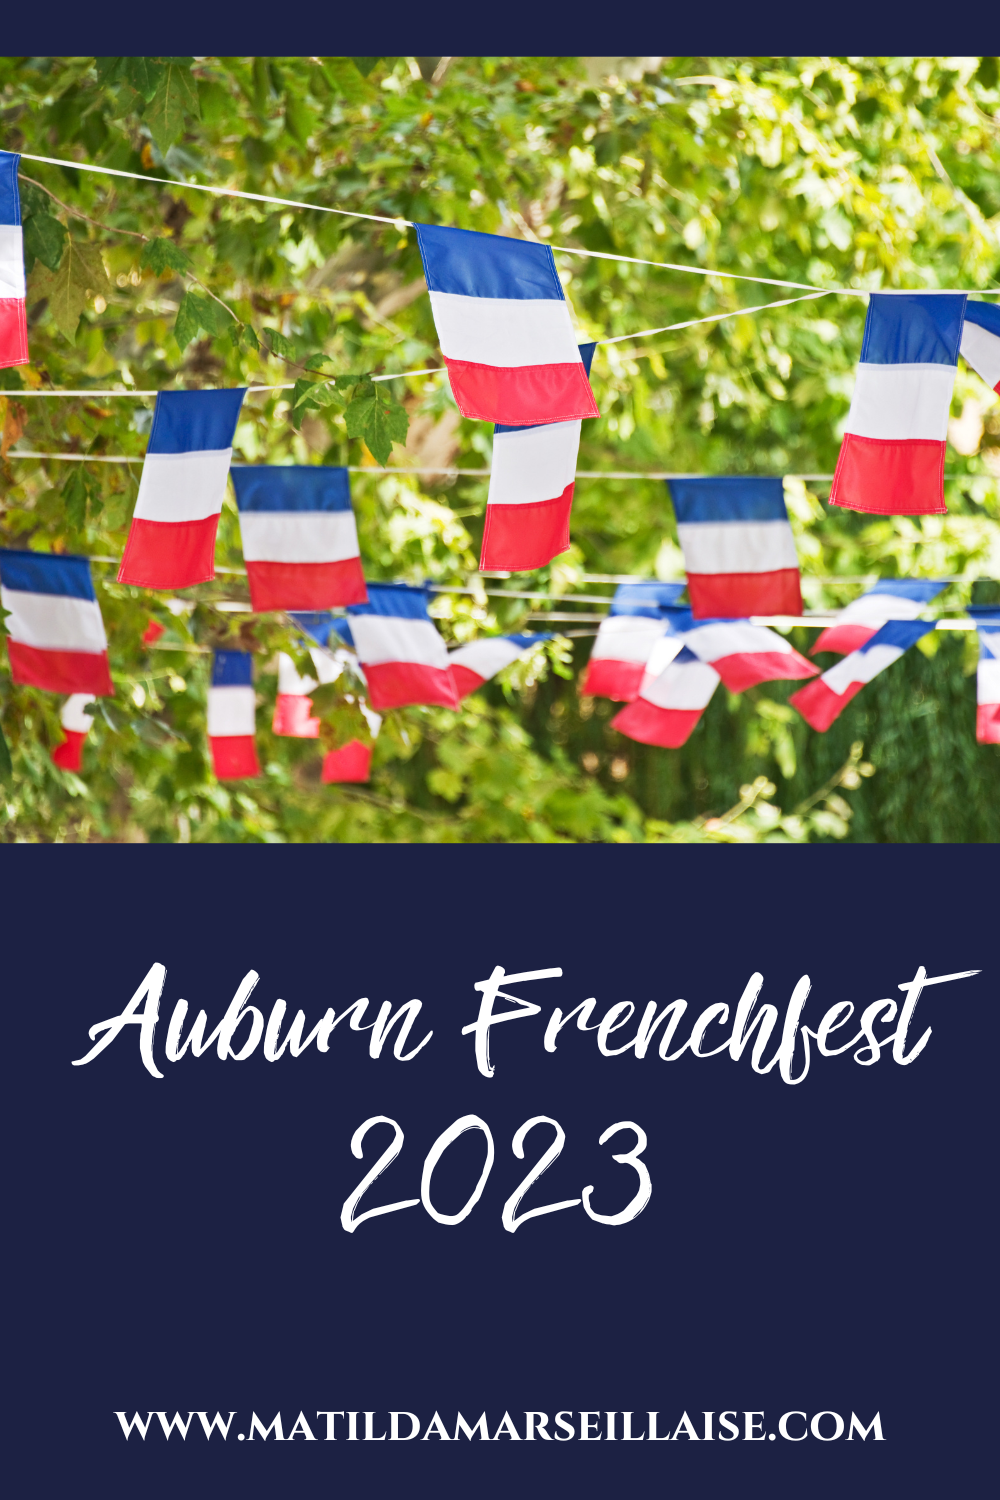 Auburn Frenchfest 2023 brings an impressive weekend of events for any Francophile